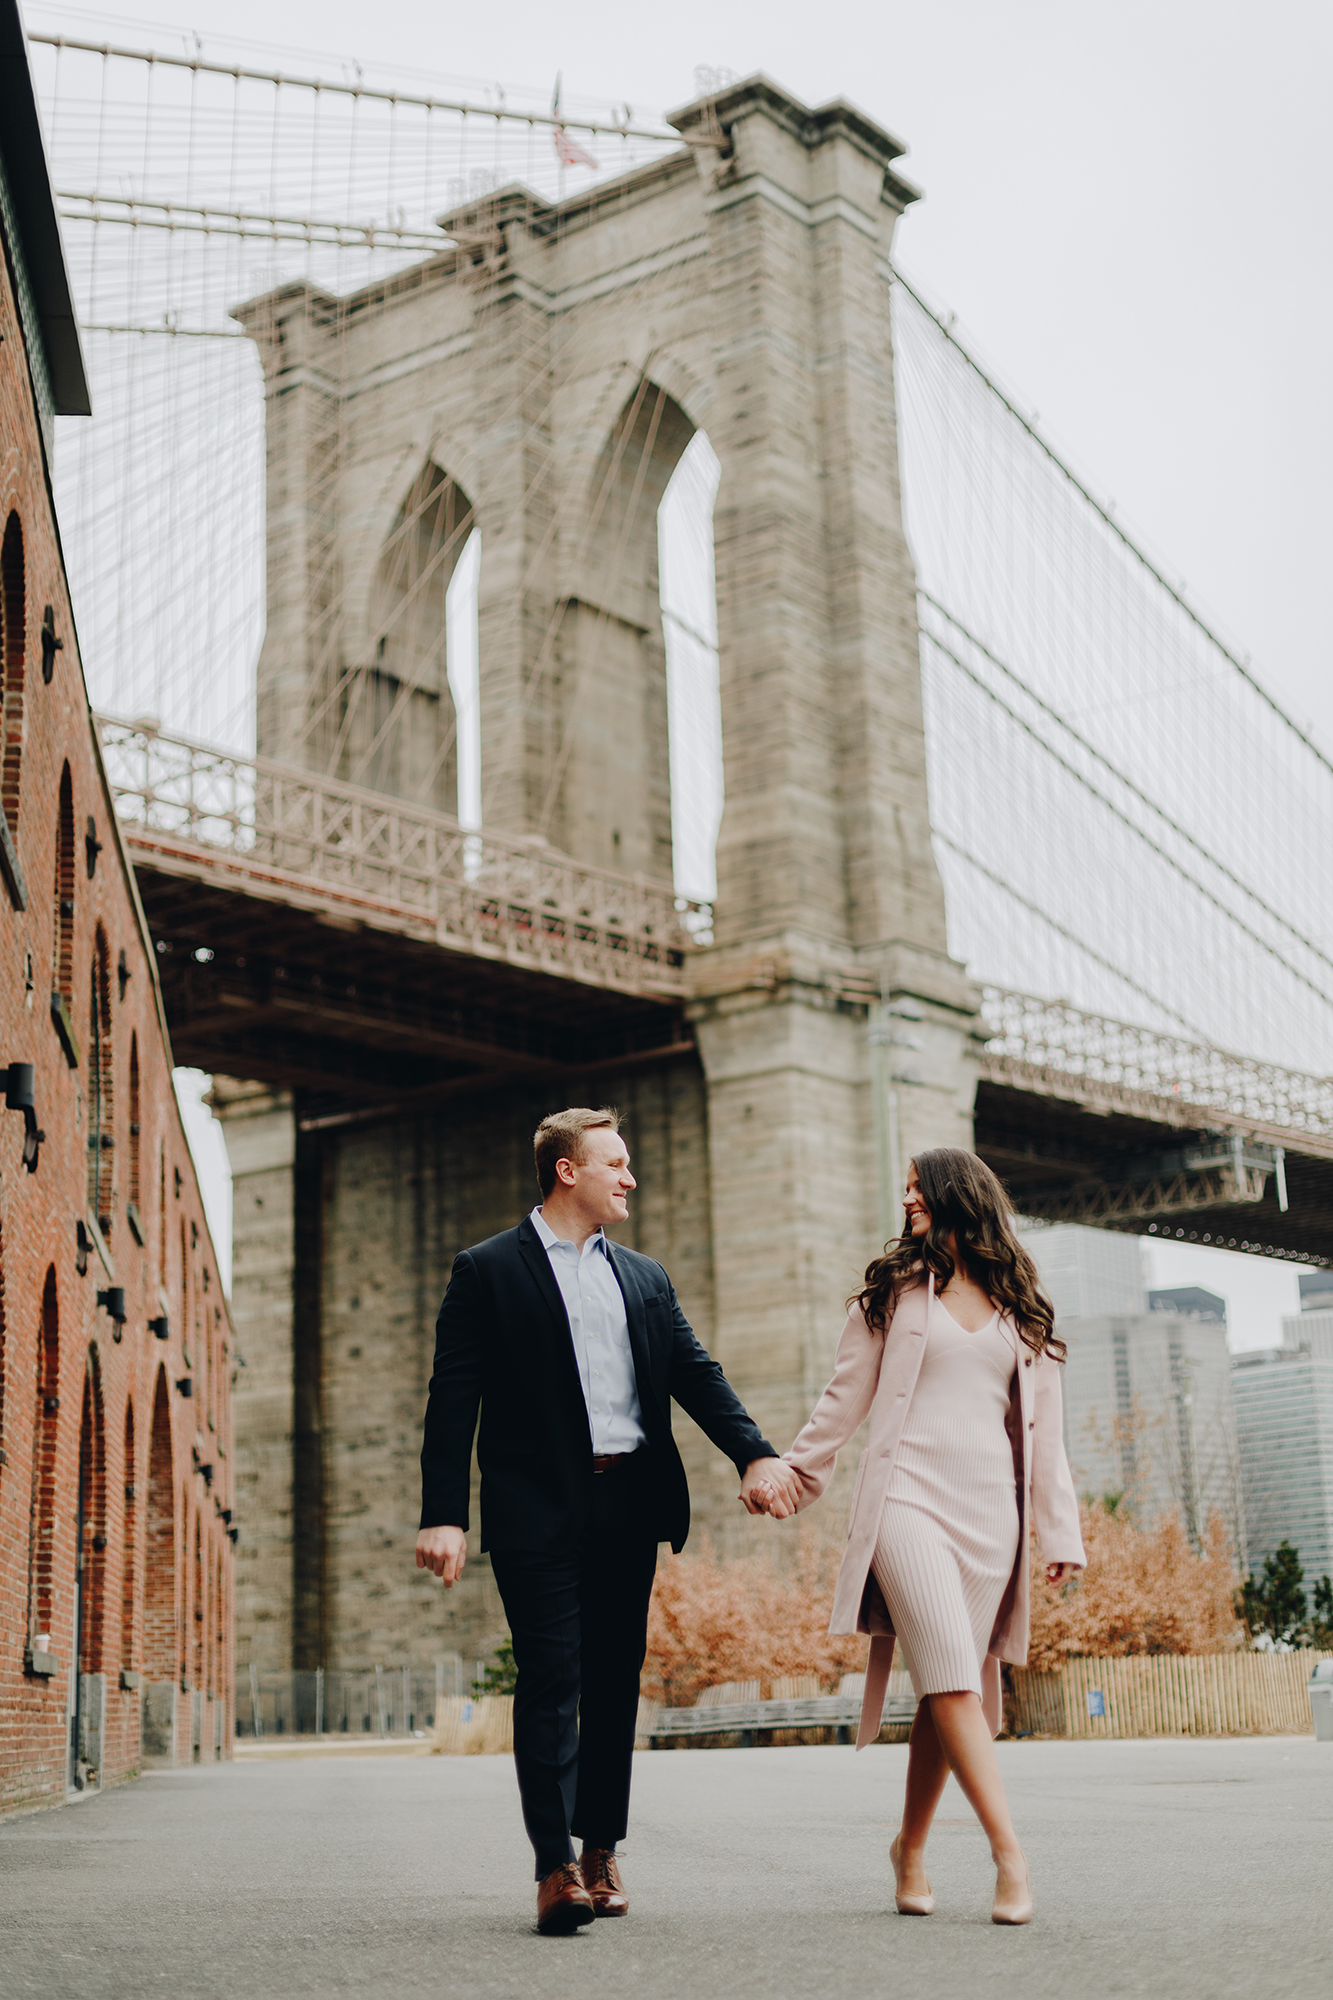 Fun Dumbo Engagement Photography in Brooklyn, NY